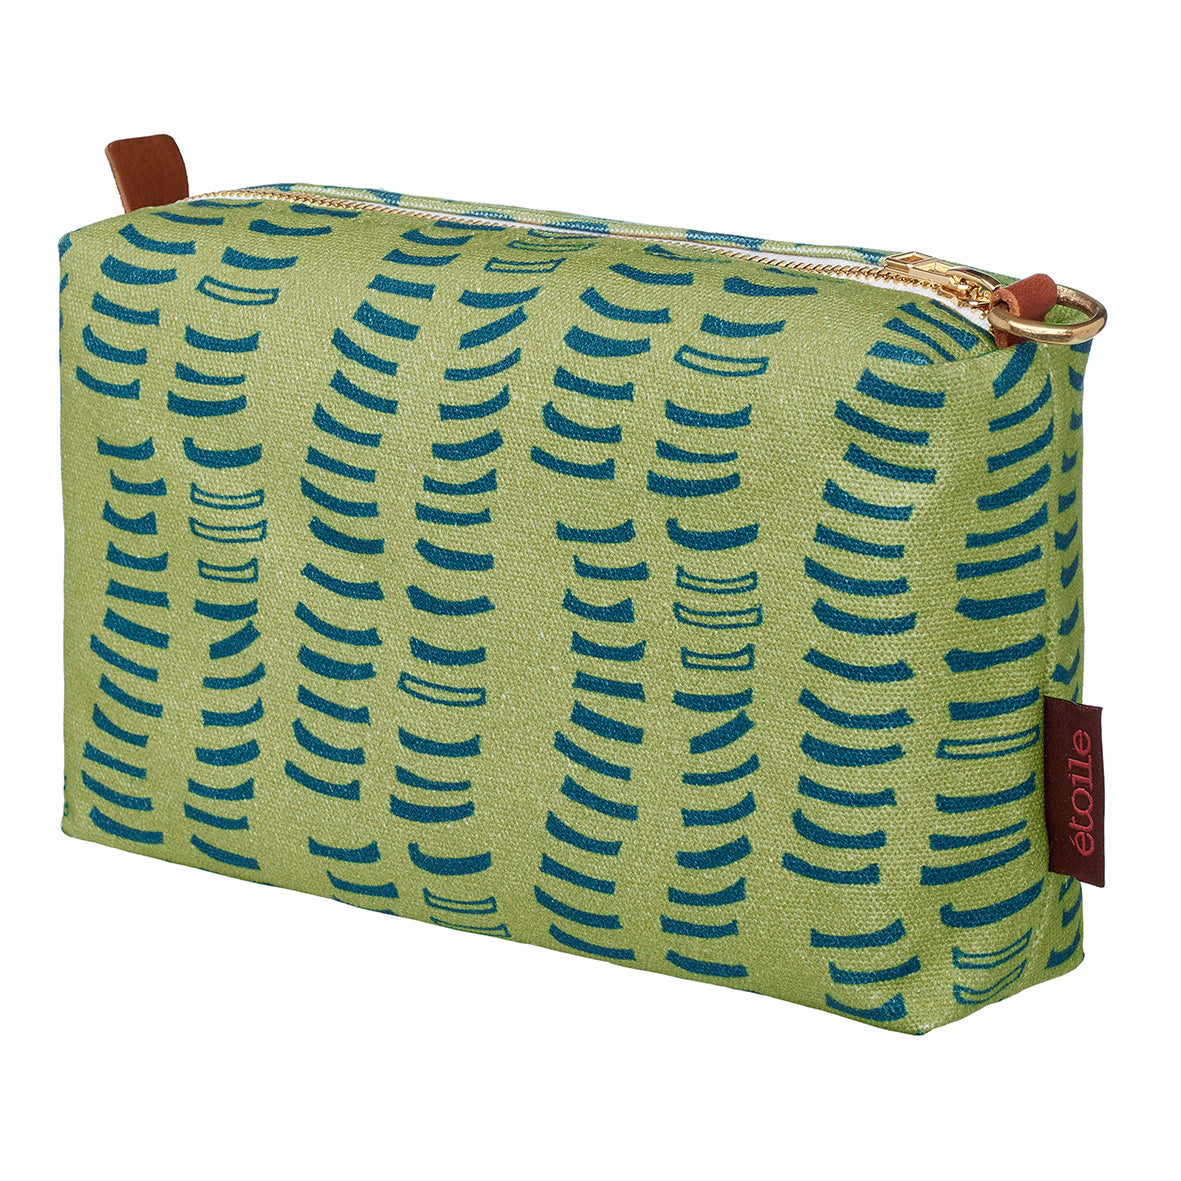 Graphic rib patterned printed toiletry or wash bag in antique moss green and dark blue ships from Canada (USA)